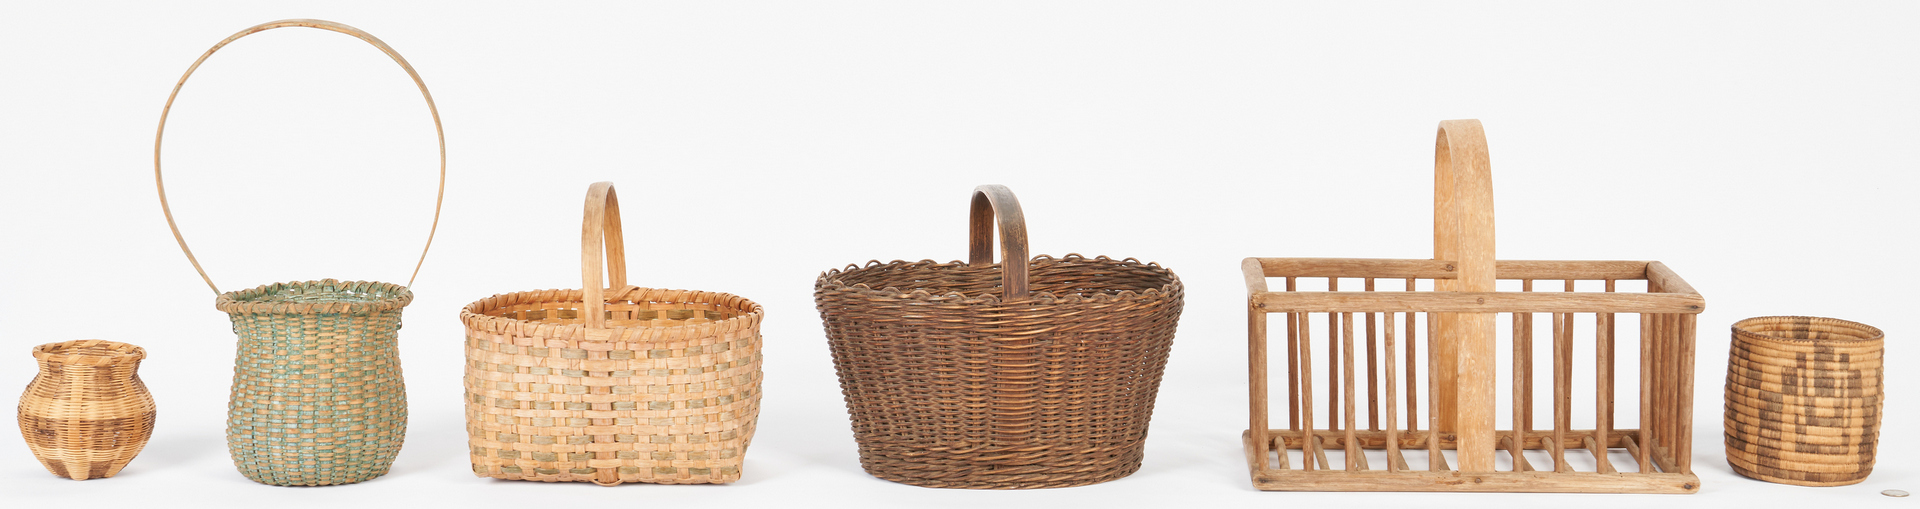 Lot 860: 6 Assorted Baskets, incl. Native American